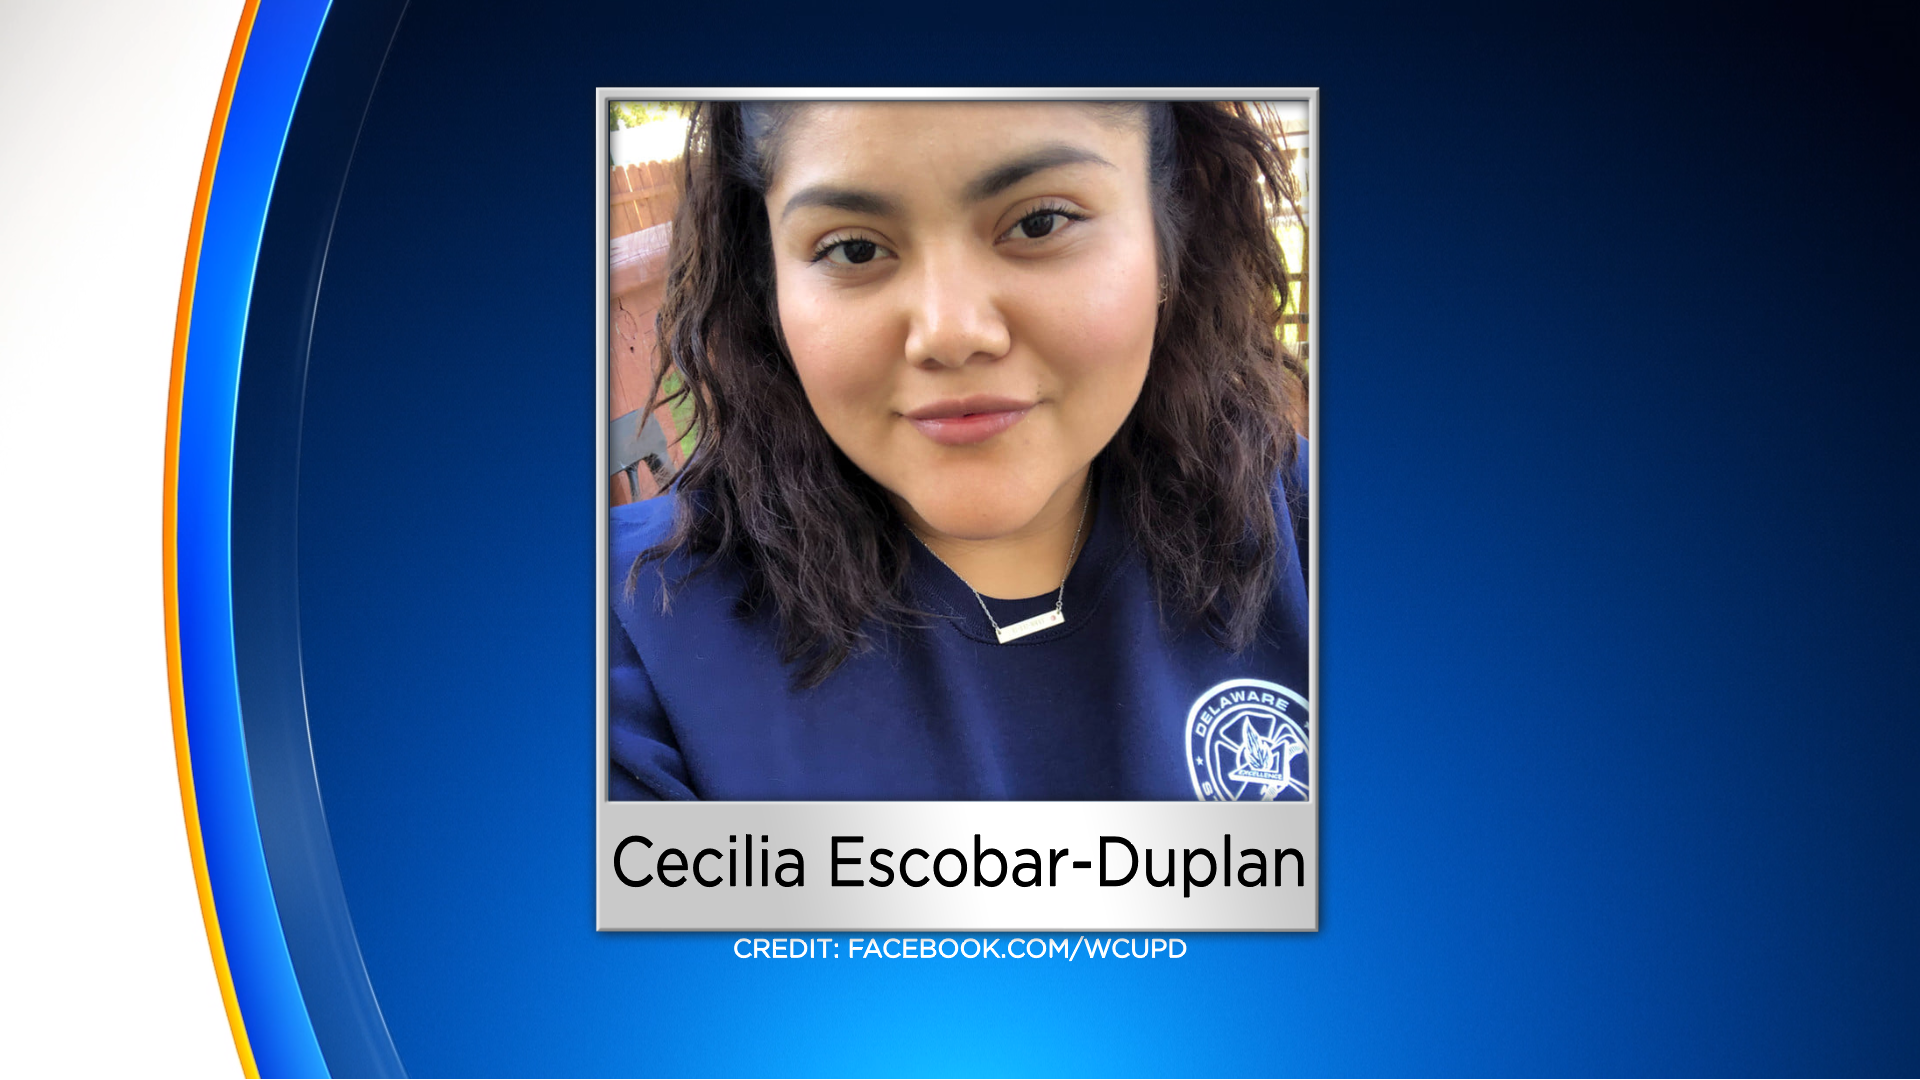 25-Year-Old Firefighter Cecilia Escobar-Duplan Fatally Struck By Car On I-95 In Wilmington, Police Say